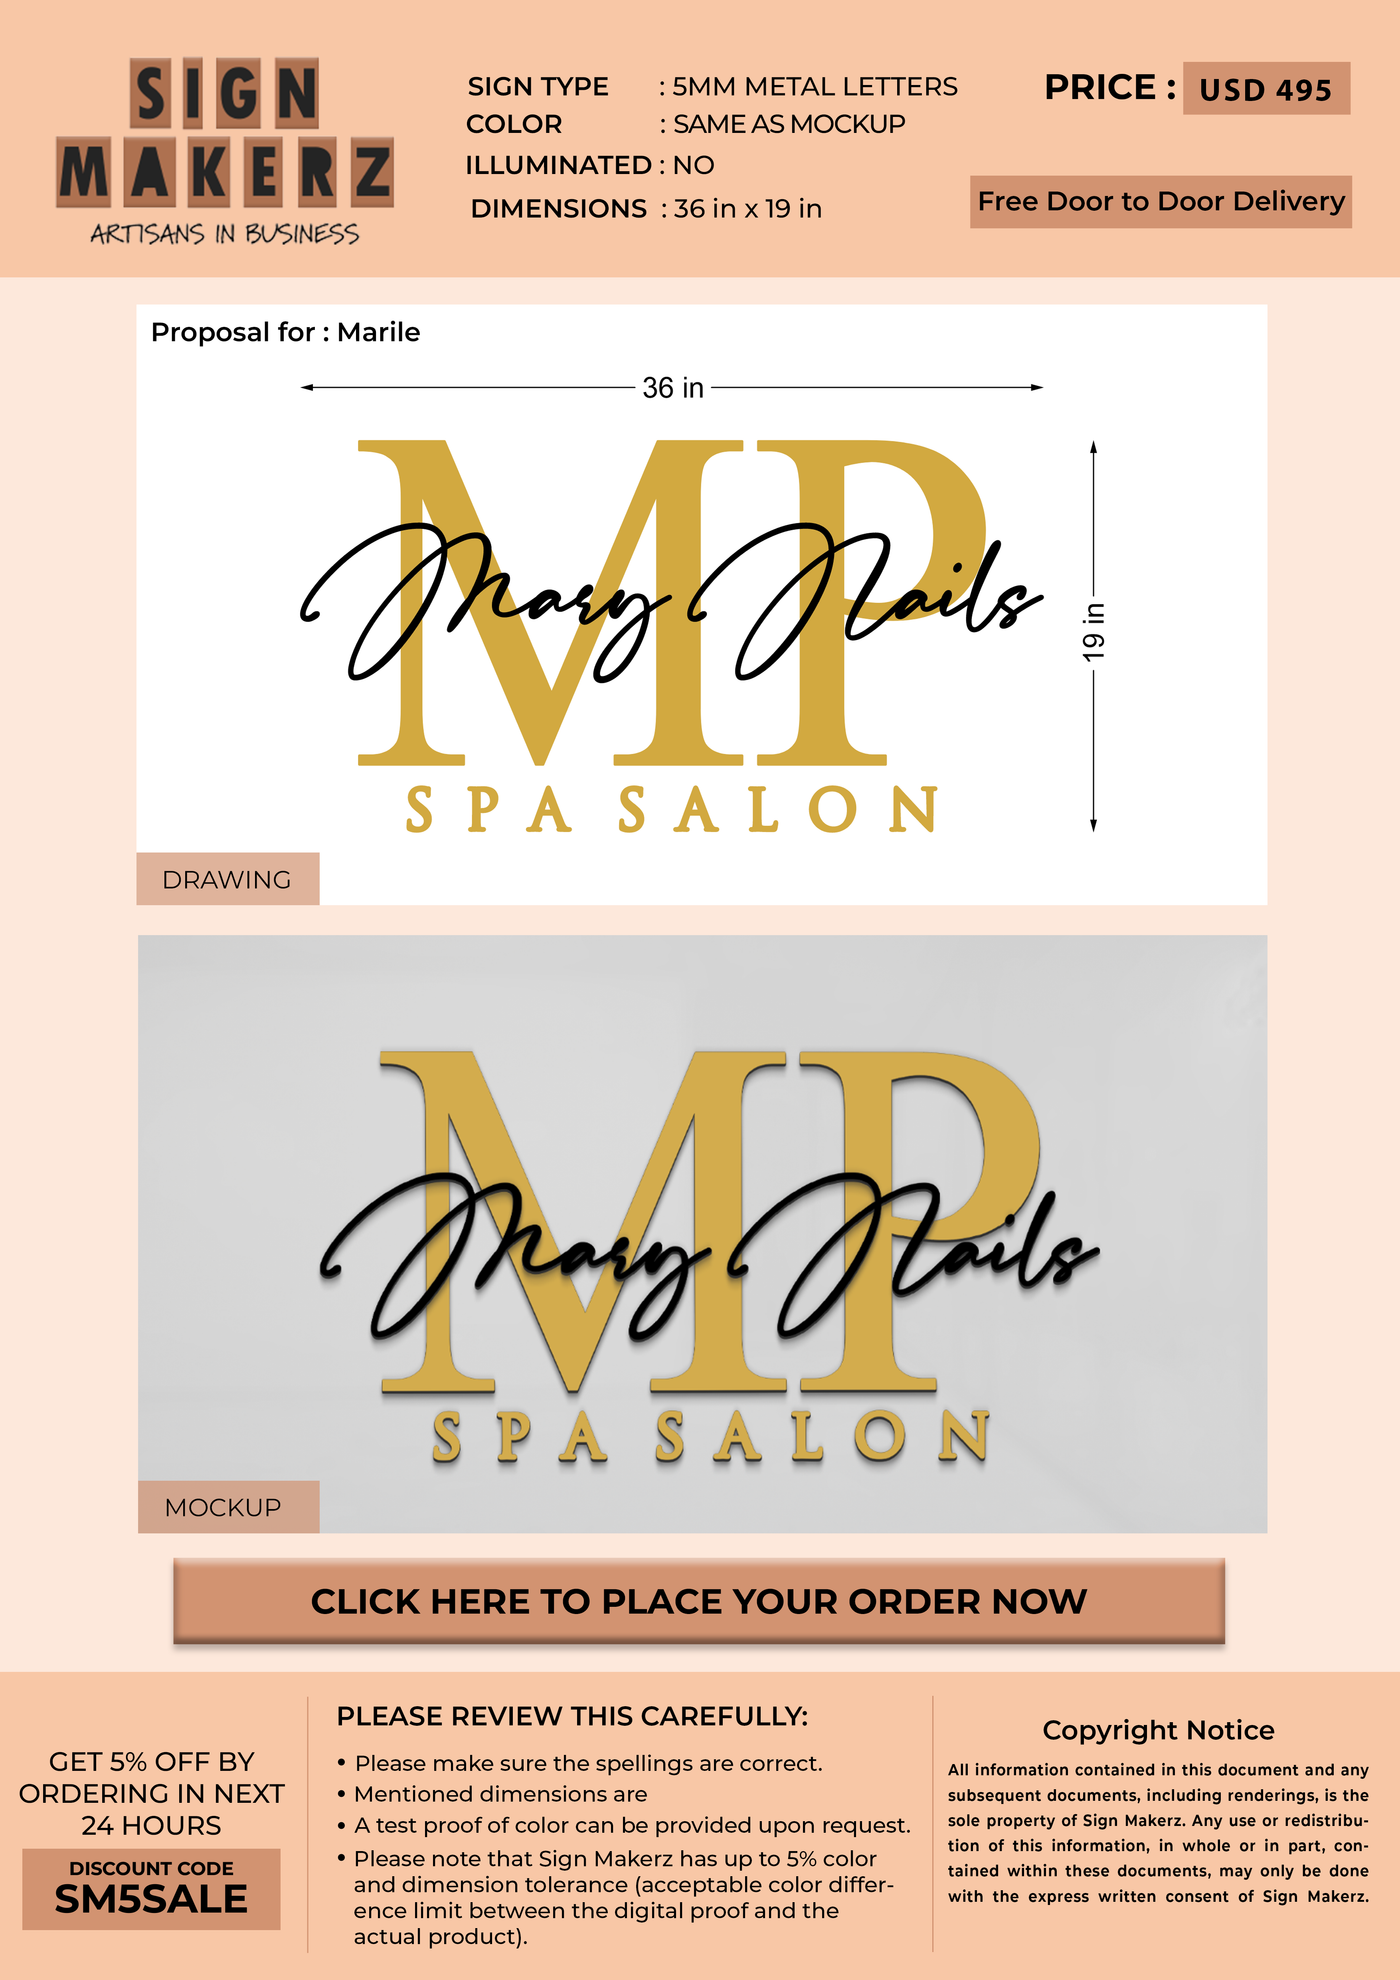 Business signage for Marile